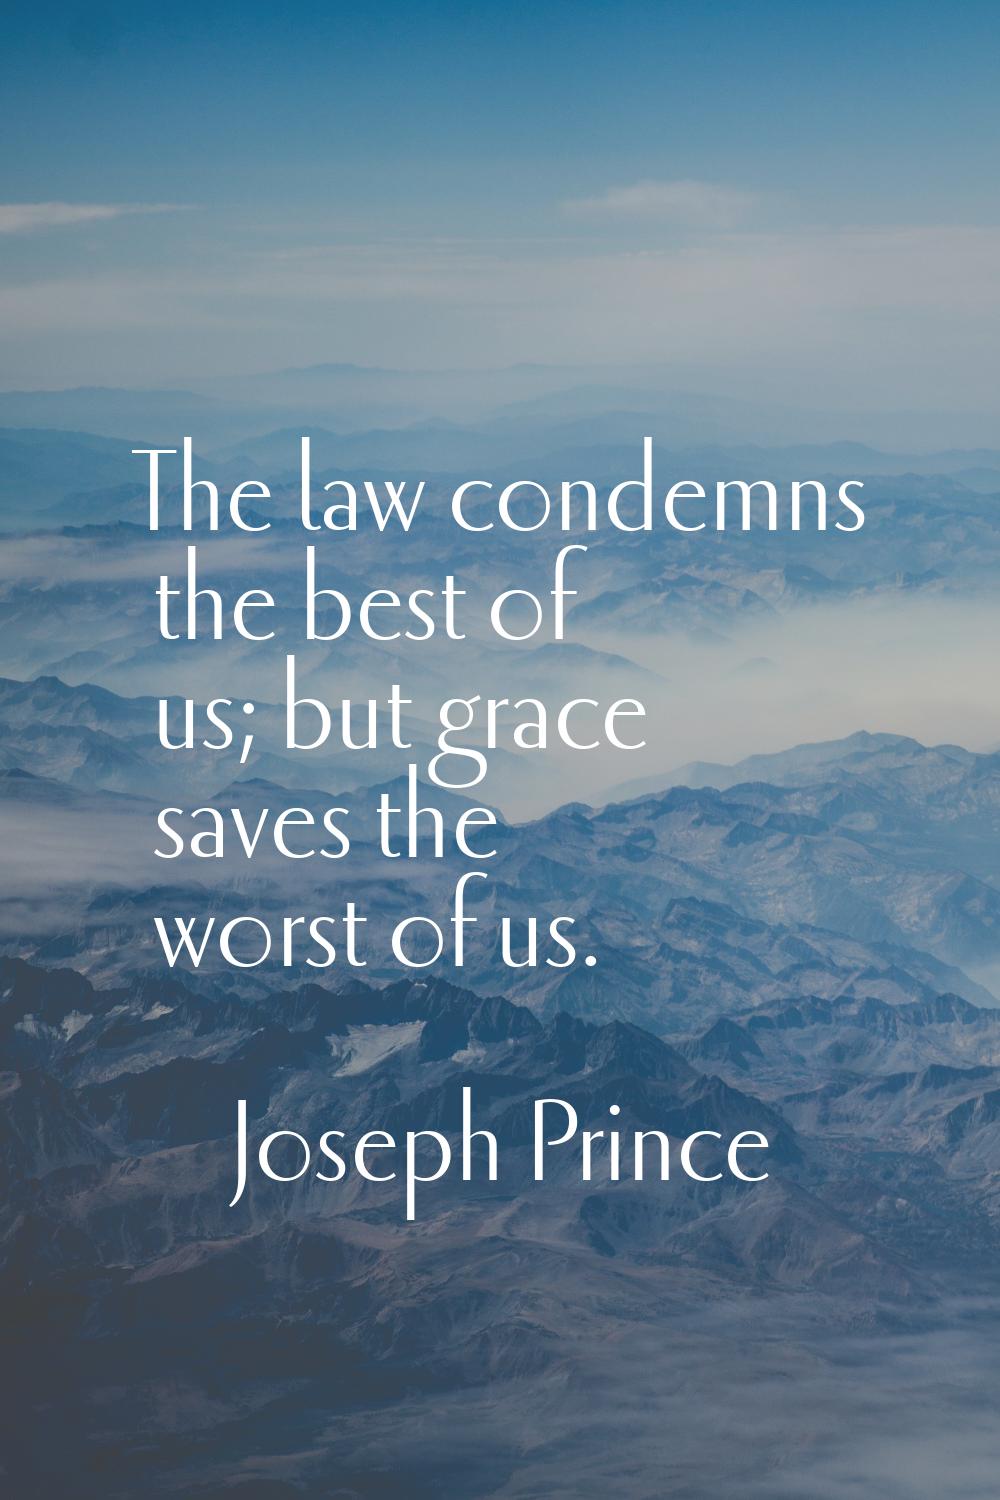 The law condemns the best of us; but grace saves the worst of us.